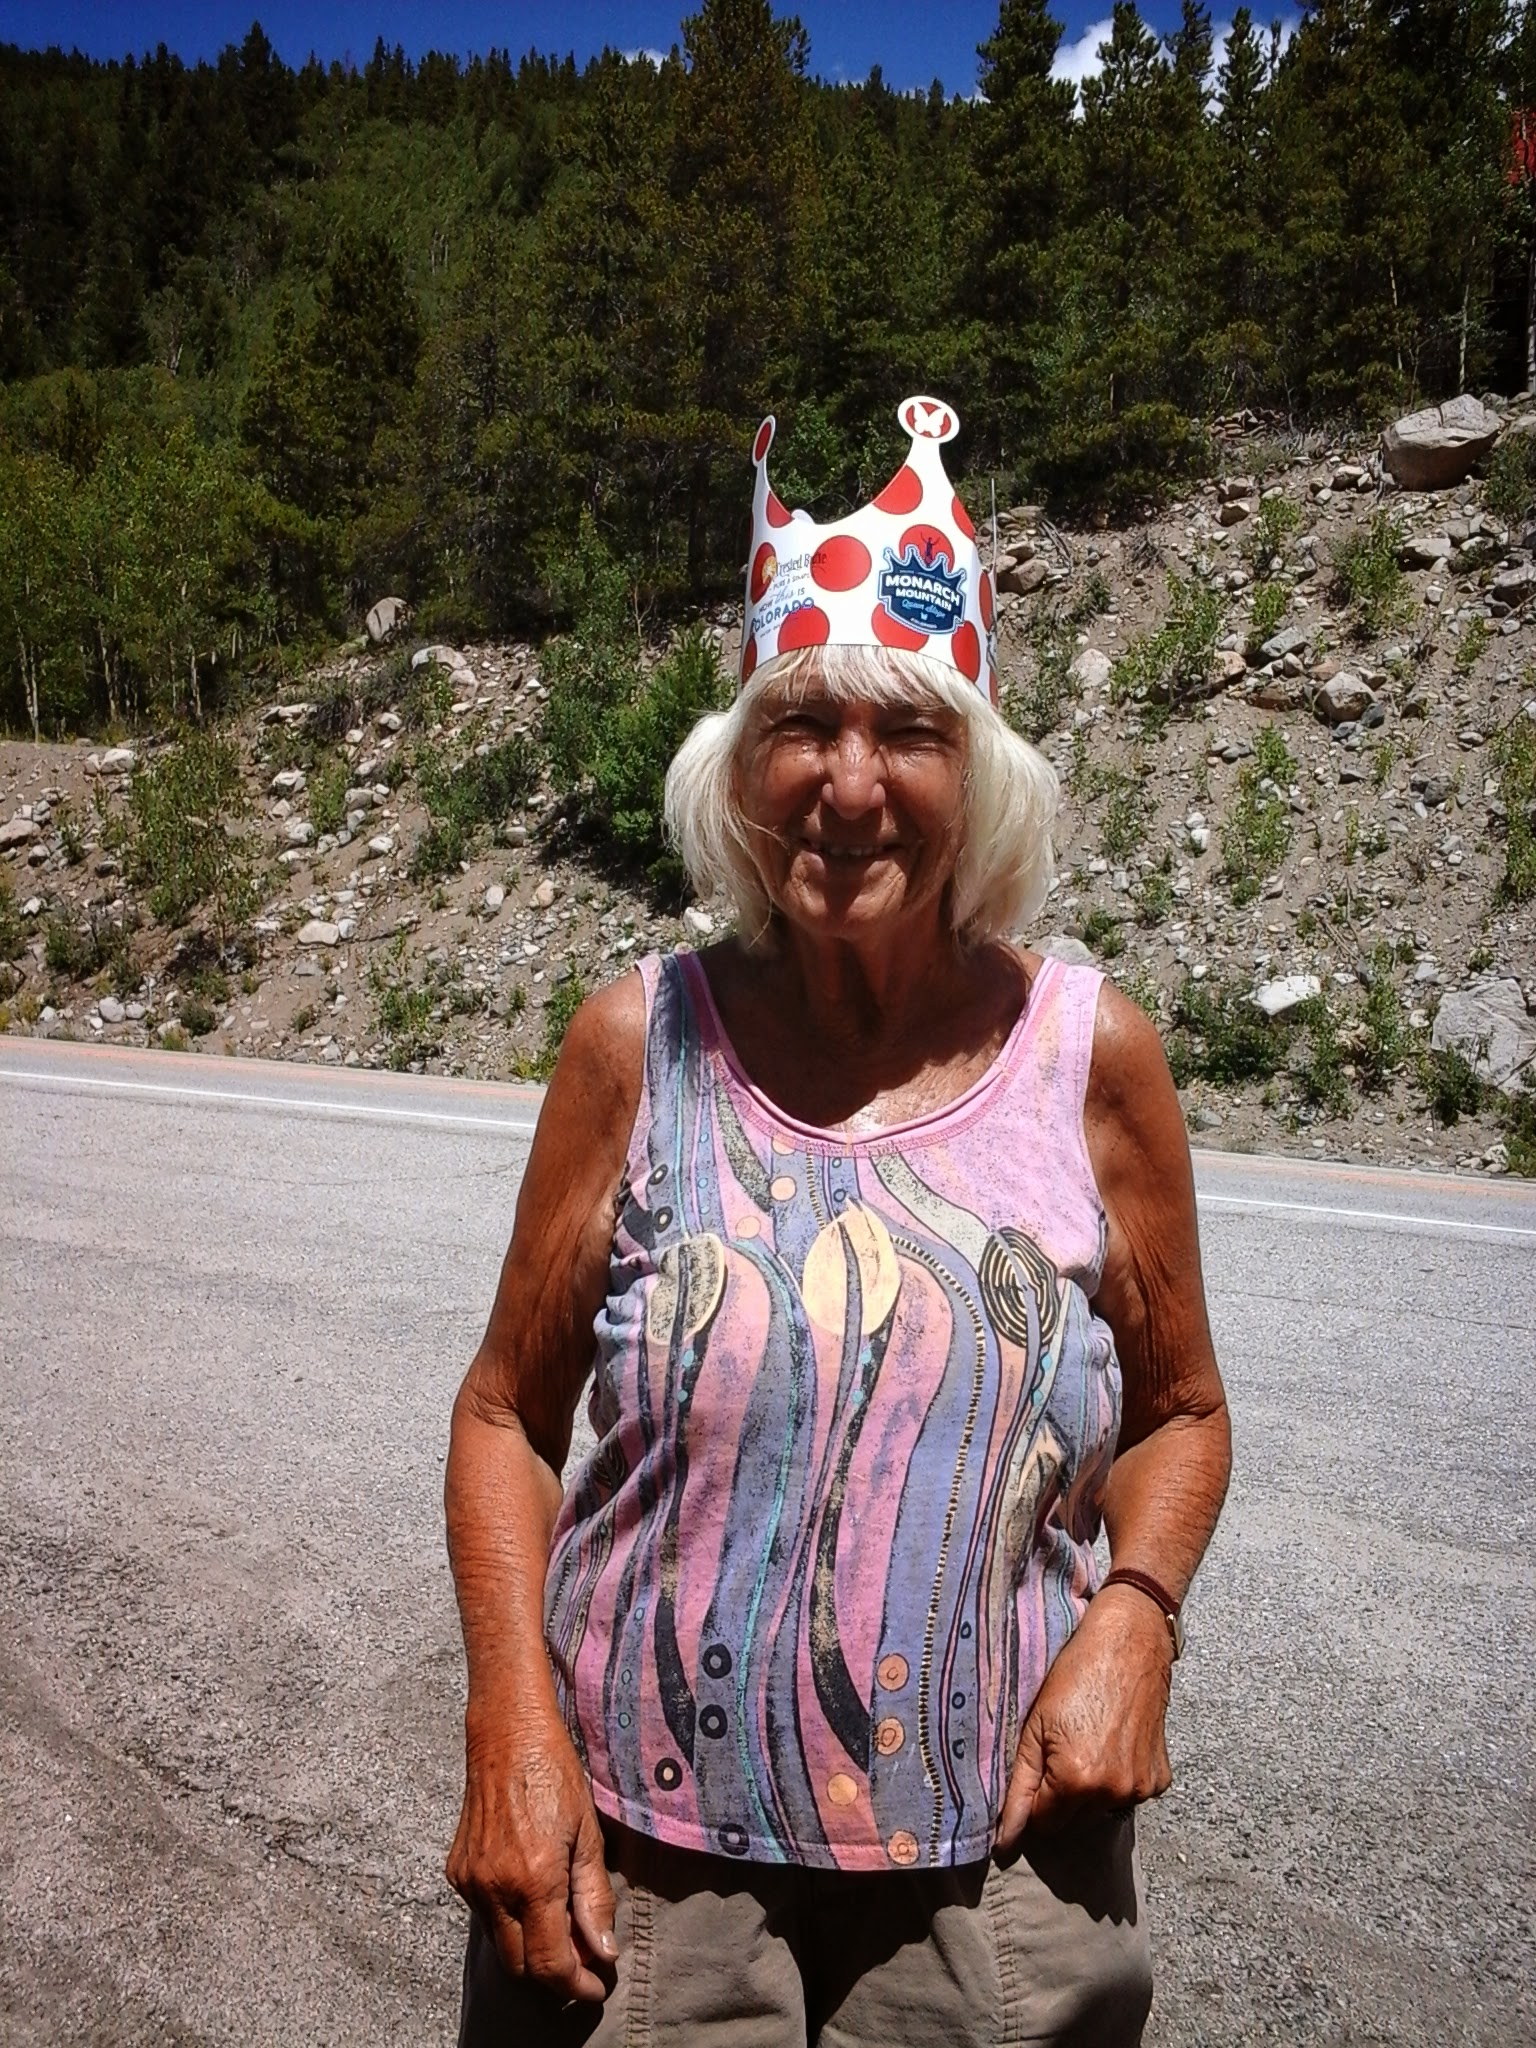 Lady standing on the side of a mountain pass with a paper crown on her head.